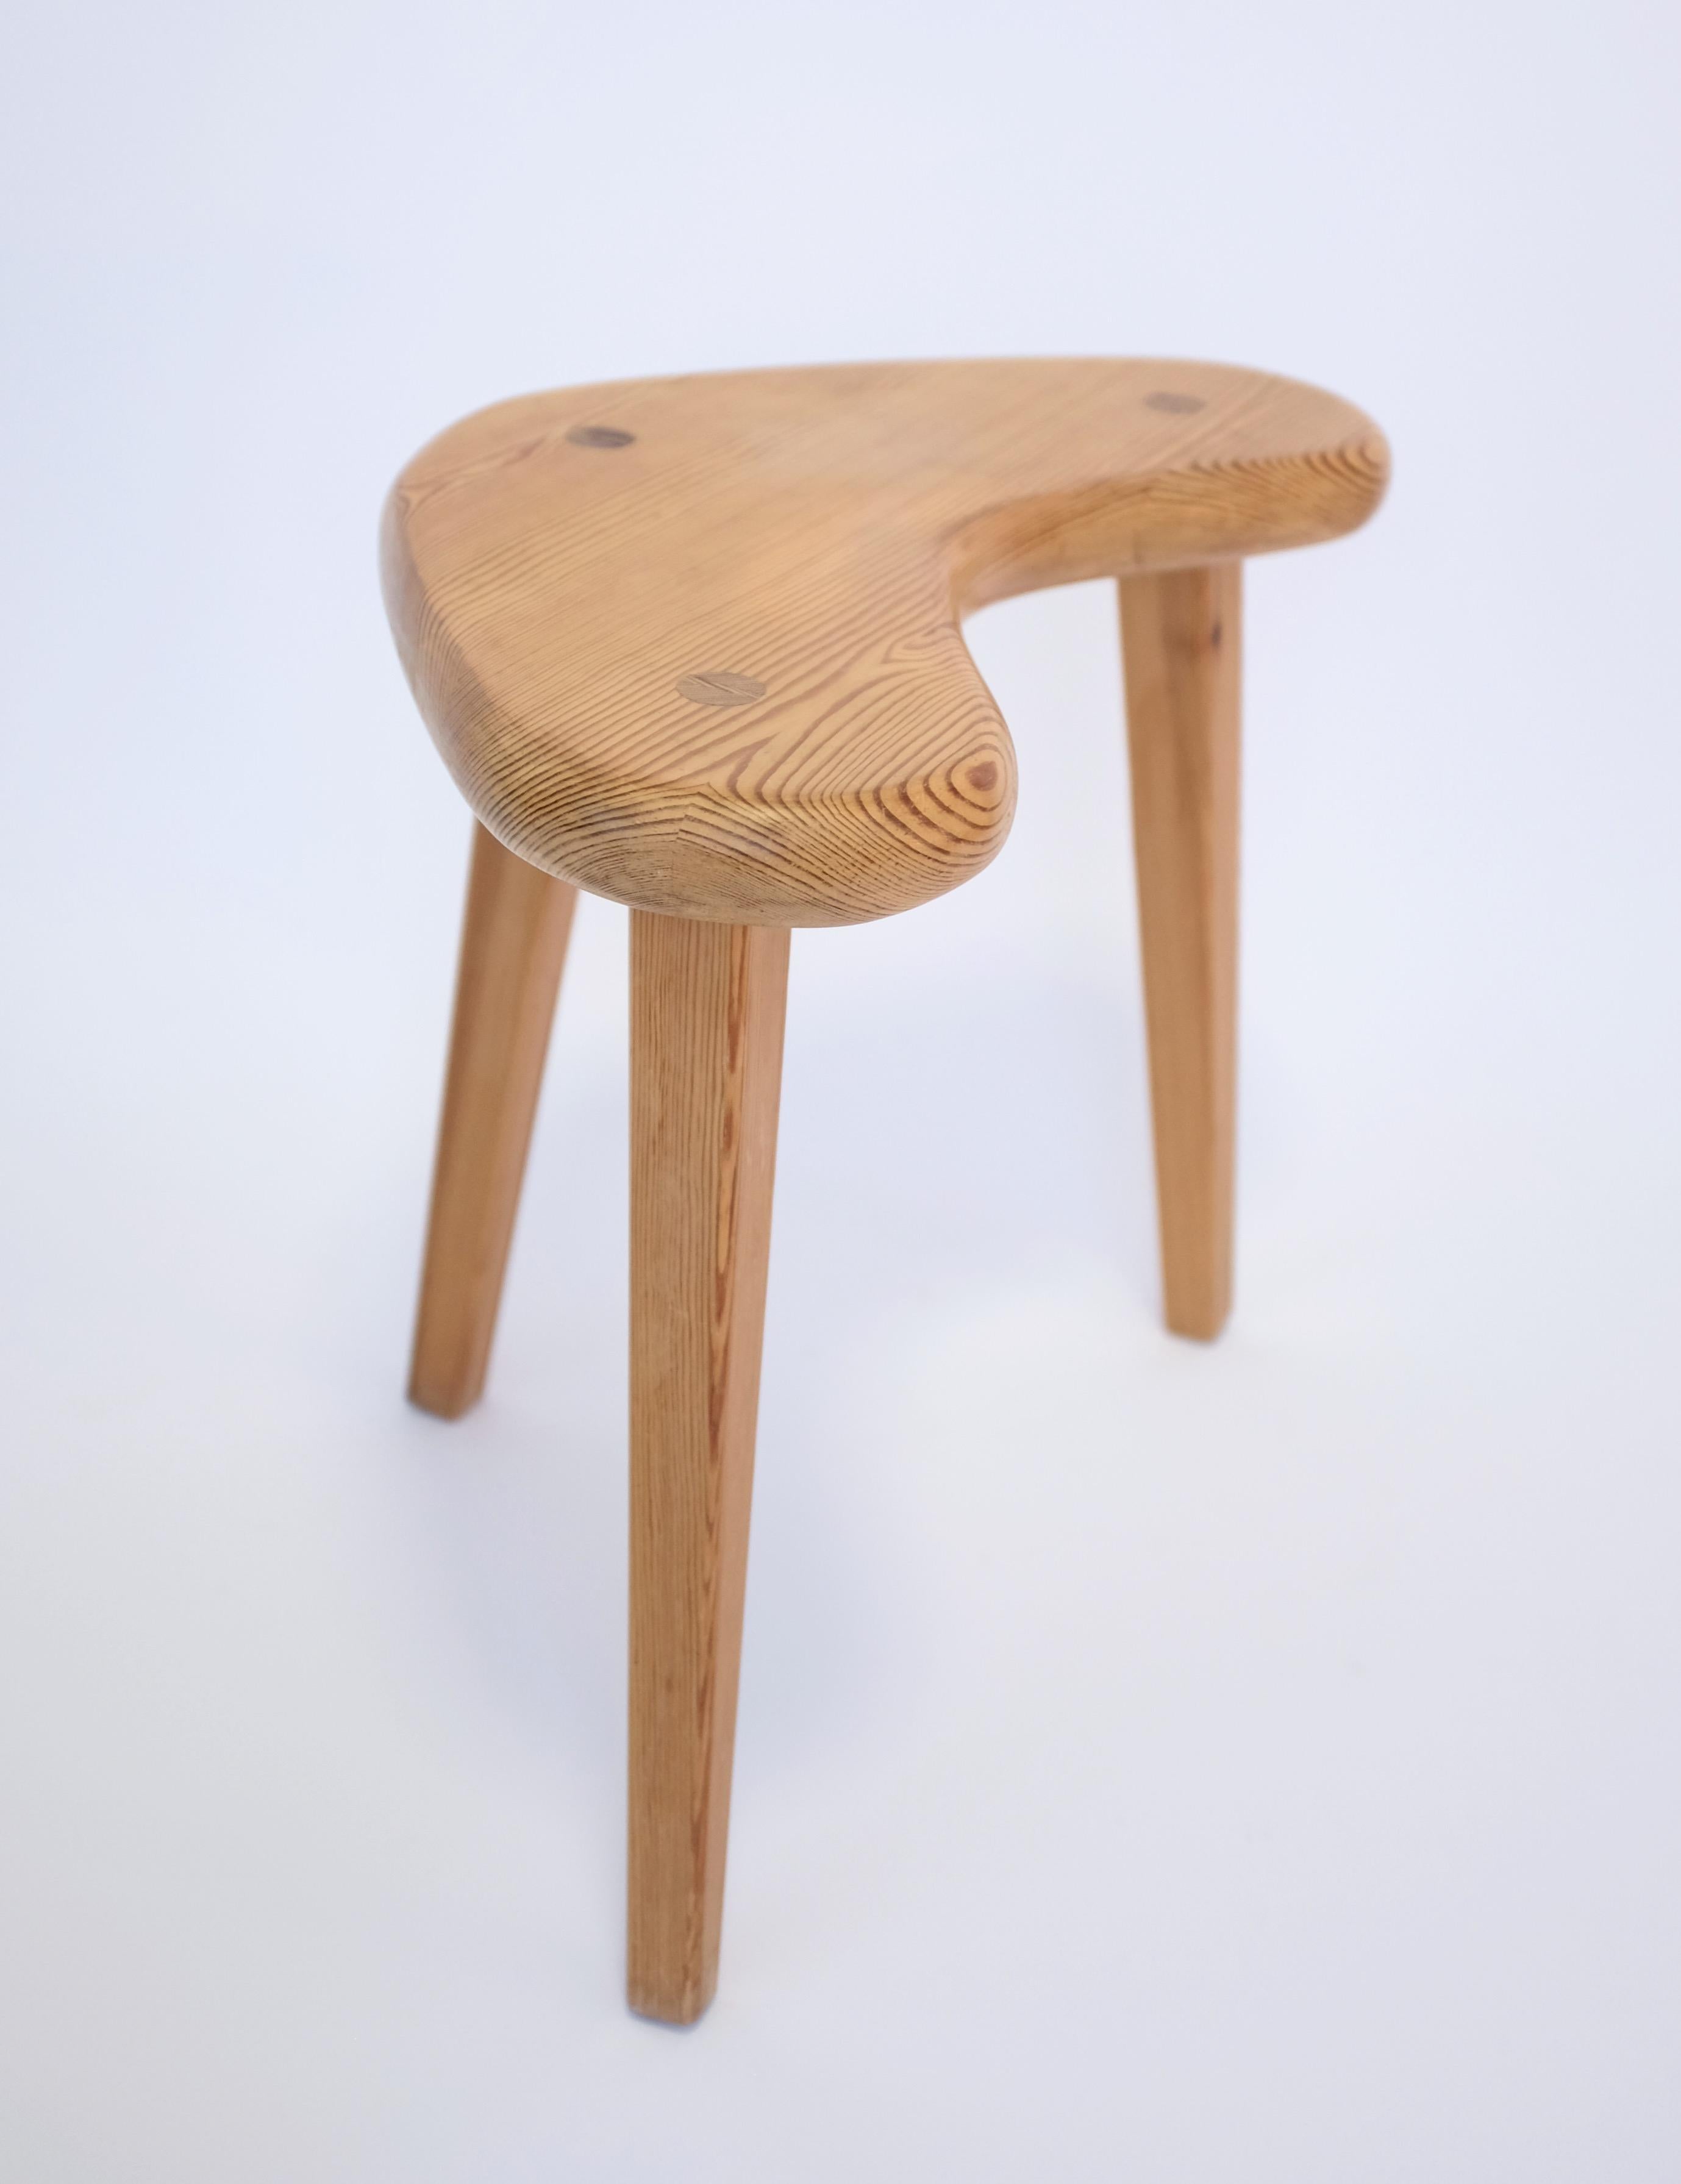 1970's Swedish Pine stool by Stig Sandkvist, Vemdalen. Typical rounded shape for the era and with beautiful details on the top. In a very good condition.

Country: Stig Sandkvist

Maker: Stig Sandkvist, Vemdalen

Dimensions: W 21 in. x D 13